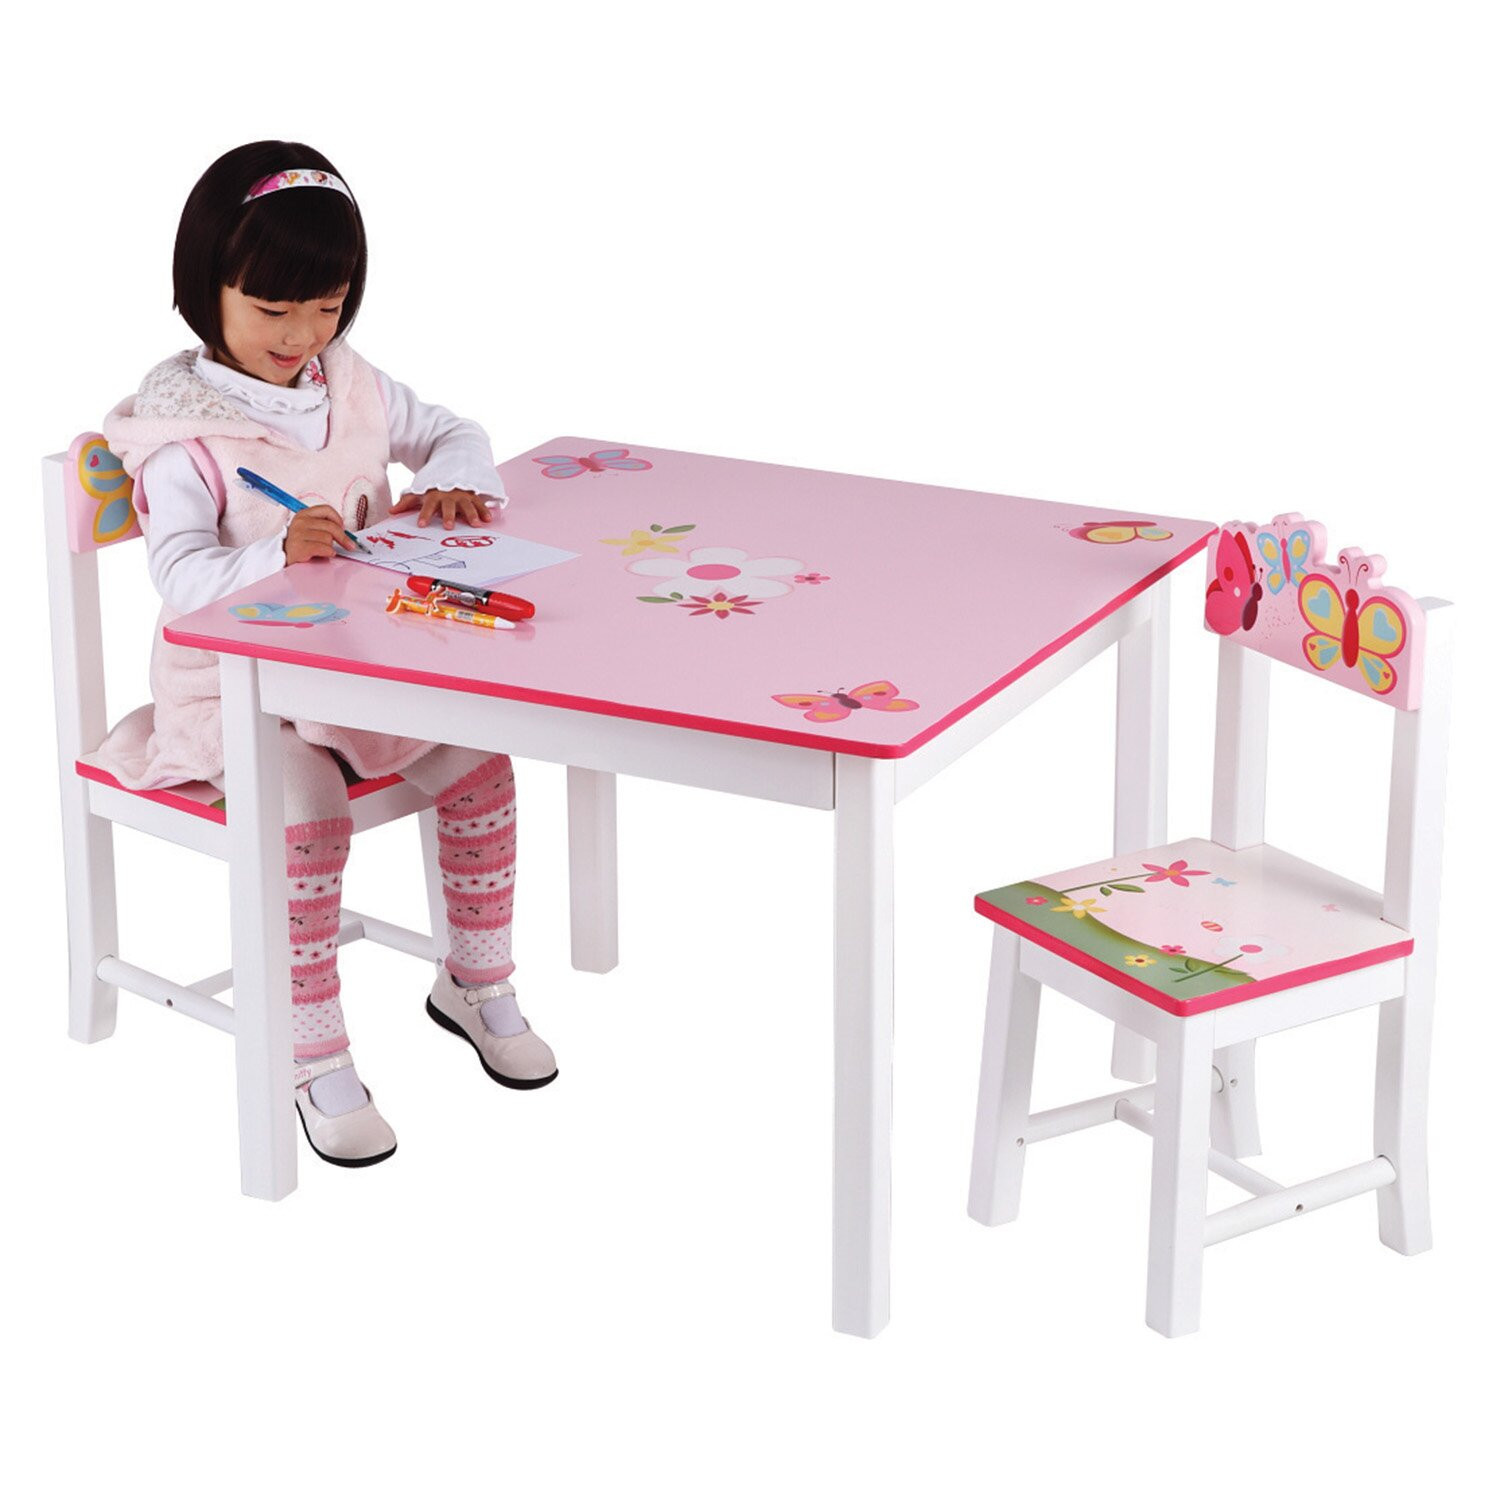 Kids Table And Bench Set
 Guidecraft Butterfly Bud s Kids 3 Piece Table and Chairs